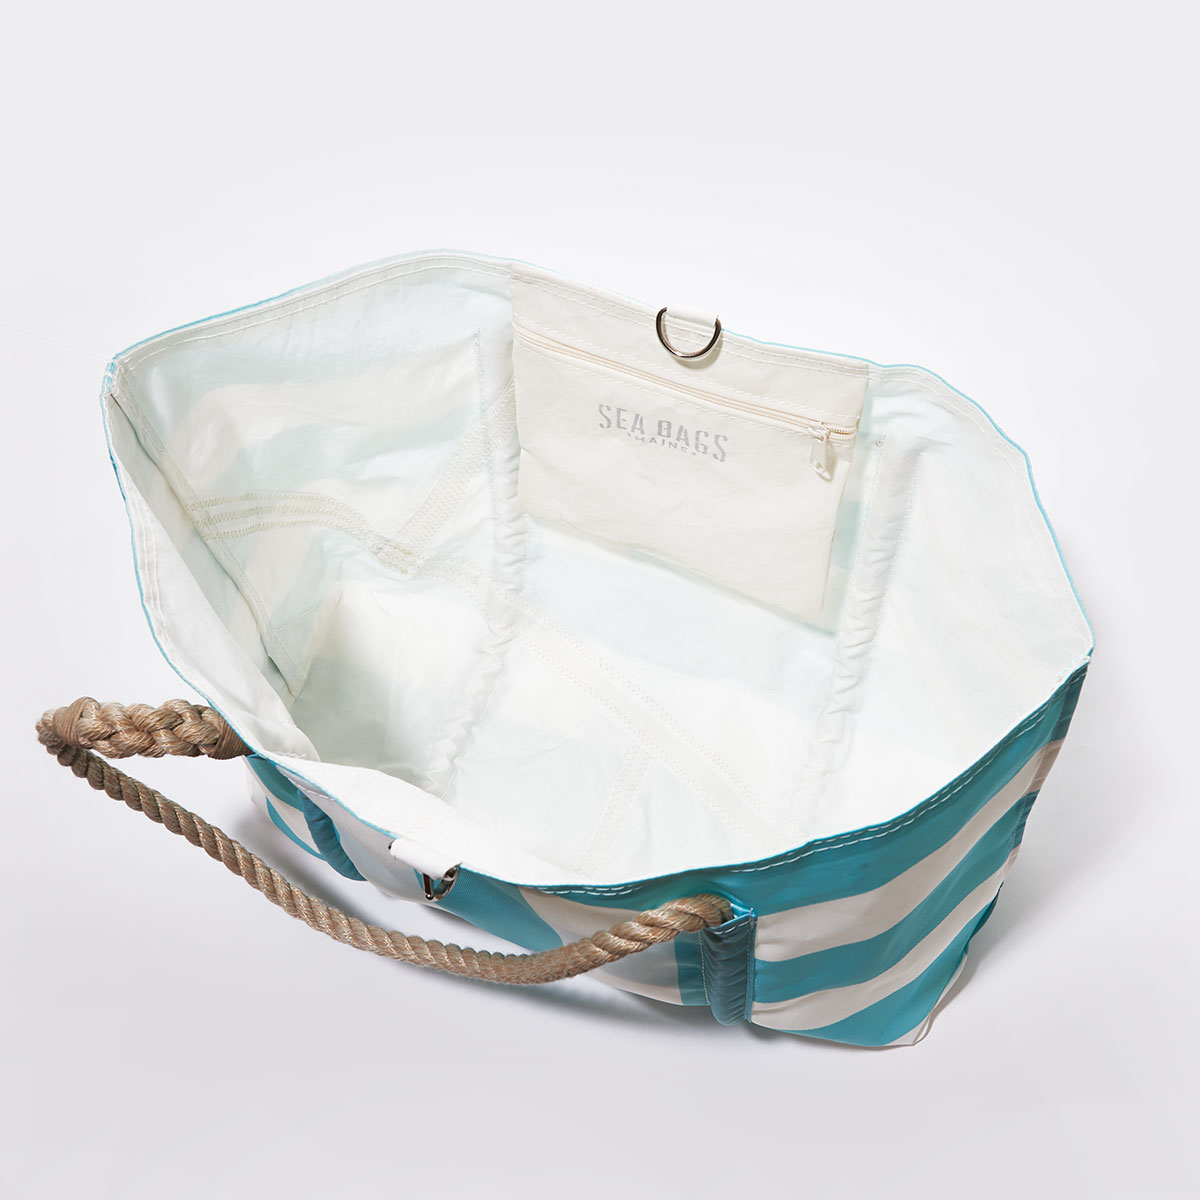 inside view: aquamarine and white plaid stripes adorn the front of a recycled sail cloth tote with hemp rope handles and a top metal clasp